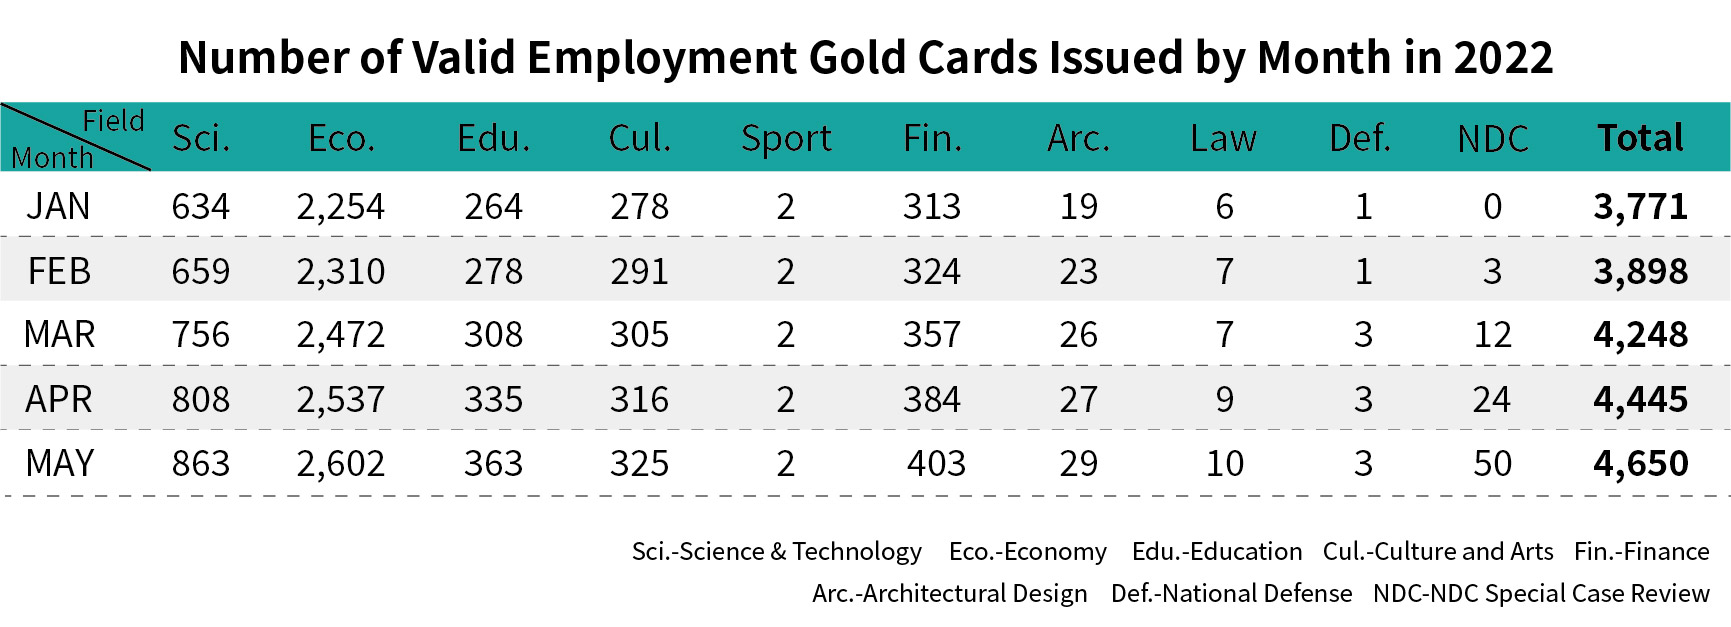 Number of Valid Employment Gold Cards Issued by Month-May